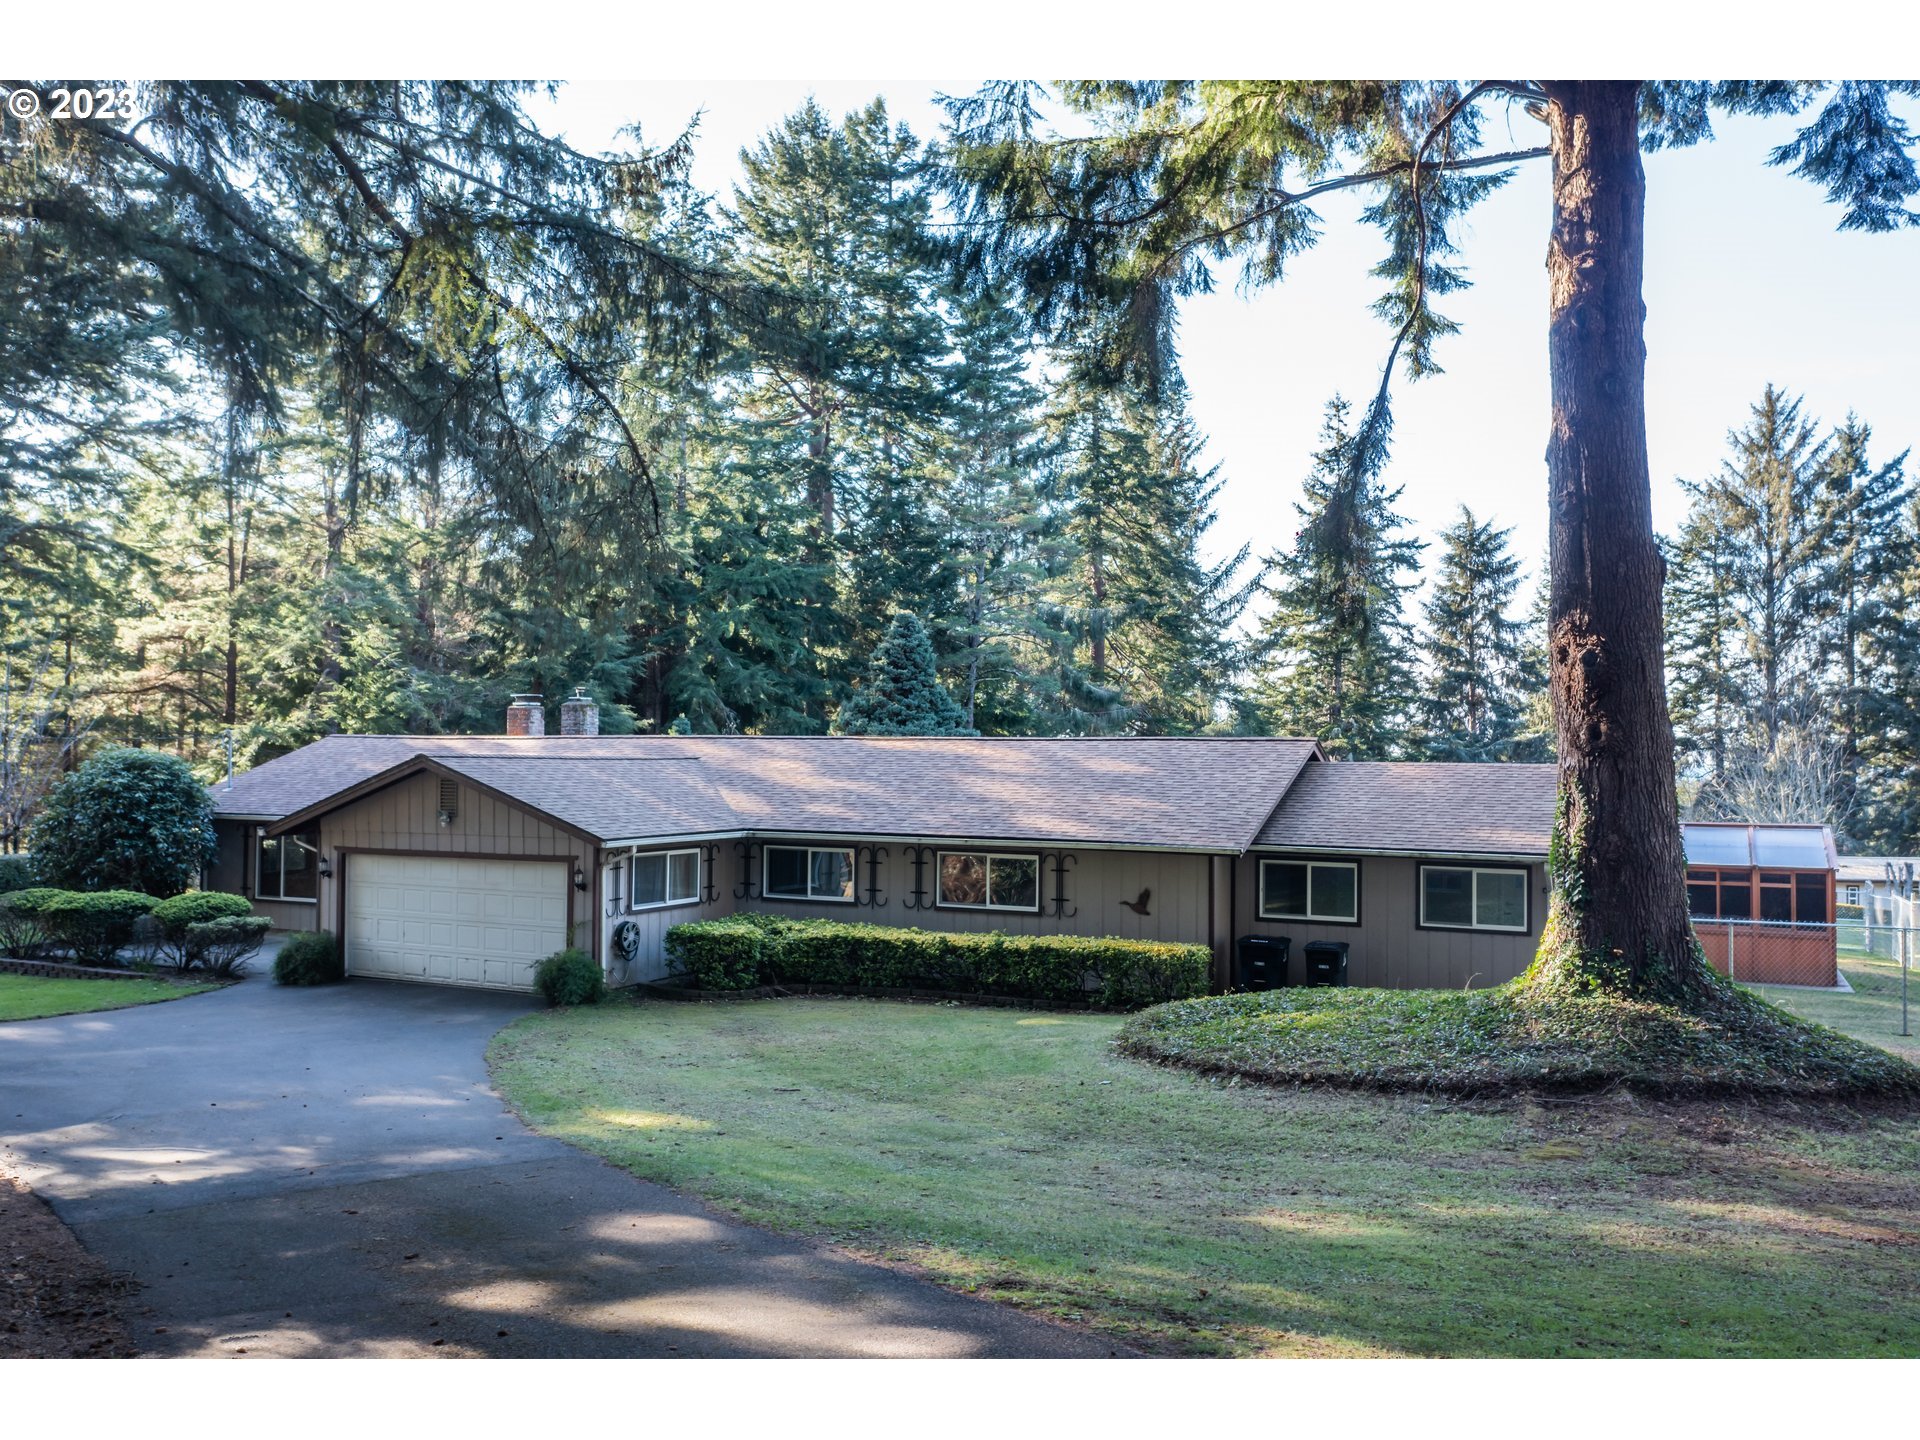 68384 TIOGA DR, North Bend, OR 97459